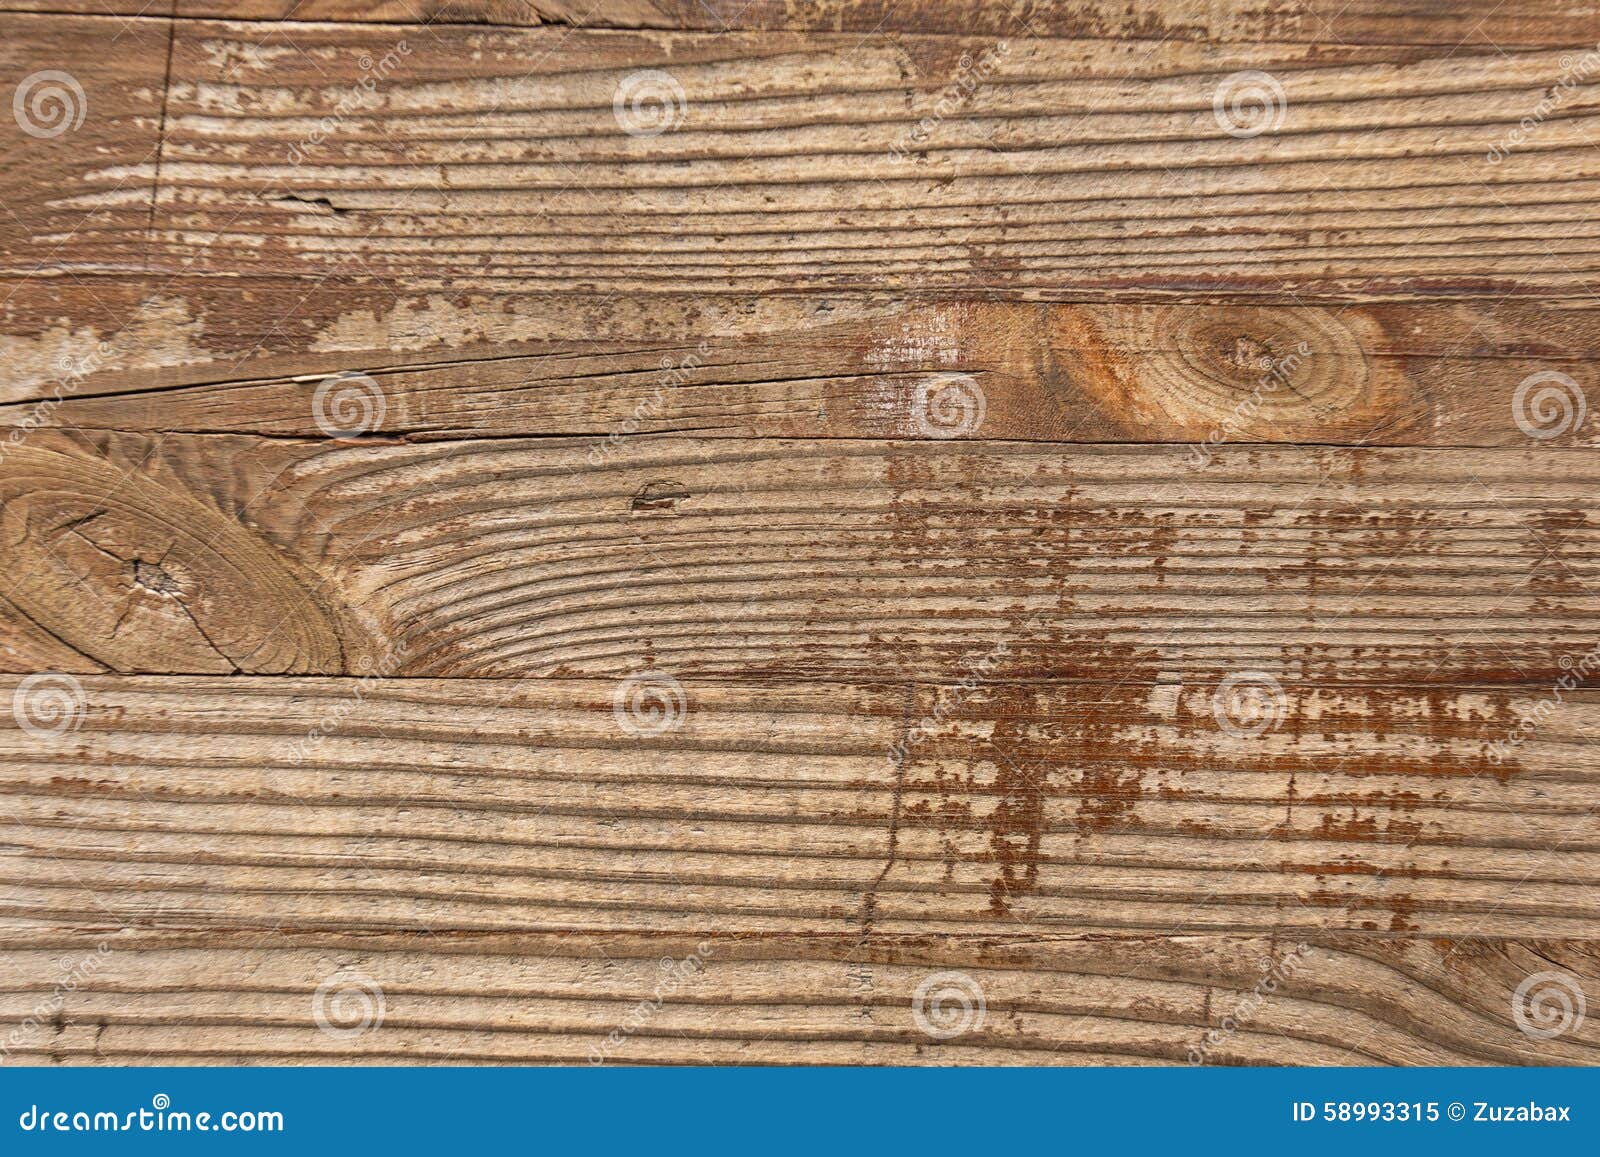 Old wooden panel background closeup. Retro timbered backdrop closeup. Aged natural wood detail